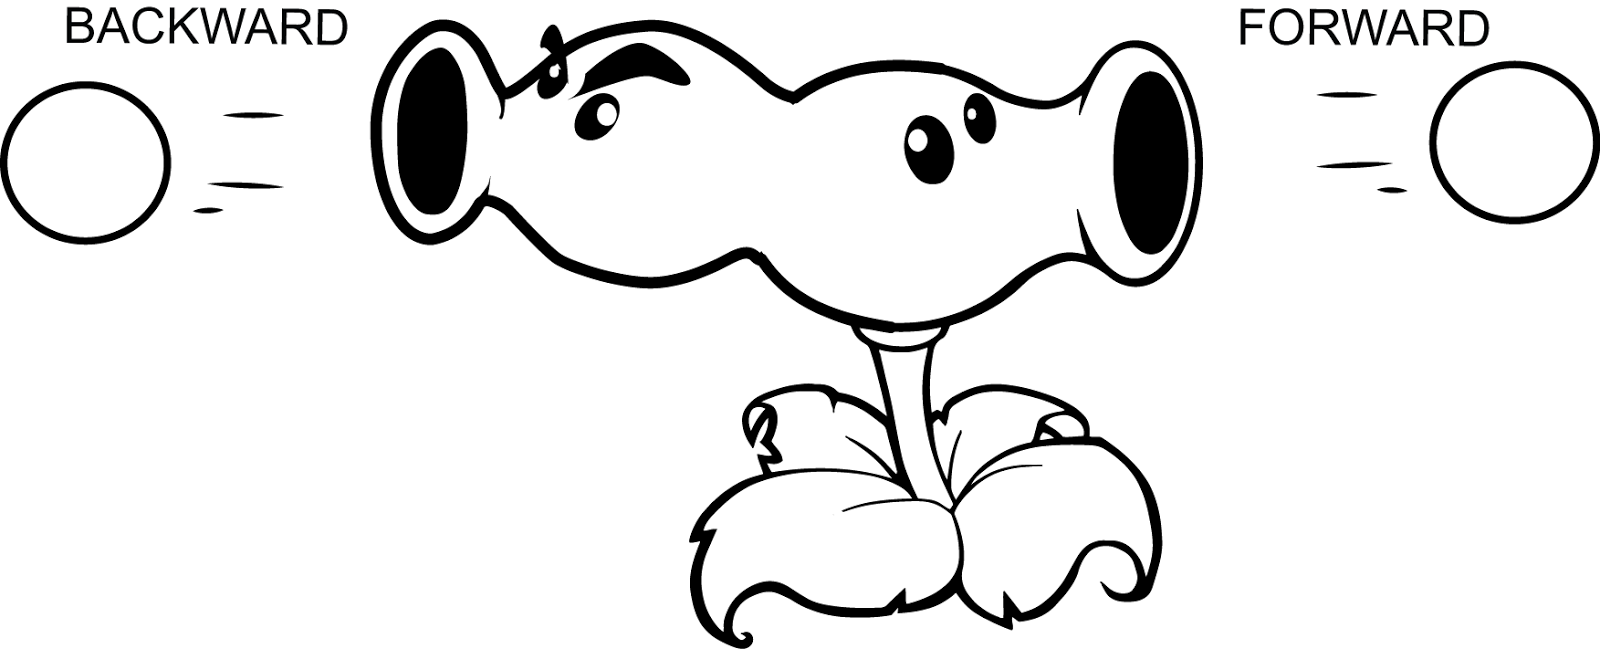 Free Plants Vs Zombies Peashooter Coloring Pages Download Free